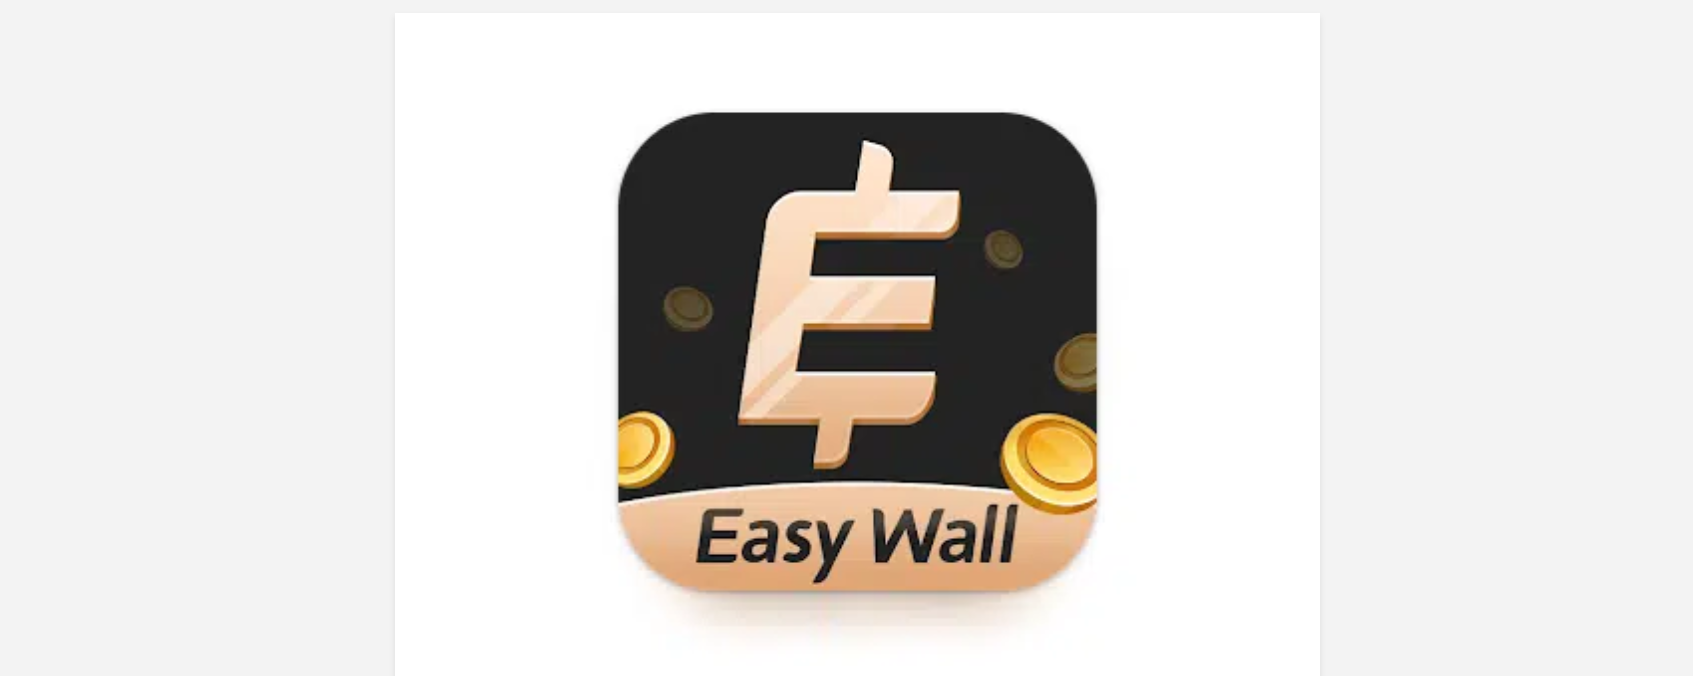 Does Easy Wall Pay Real Money? My Honest Review